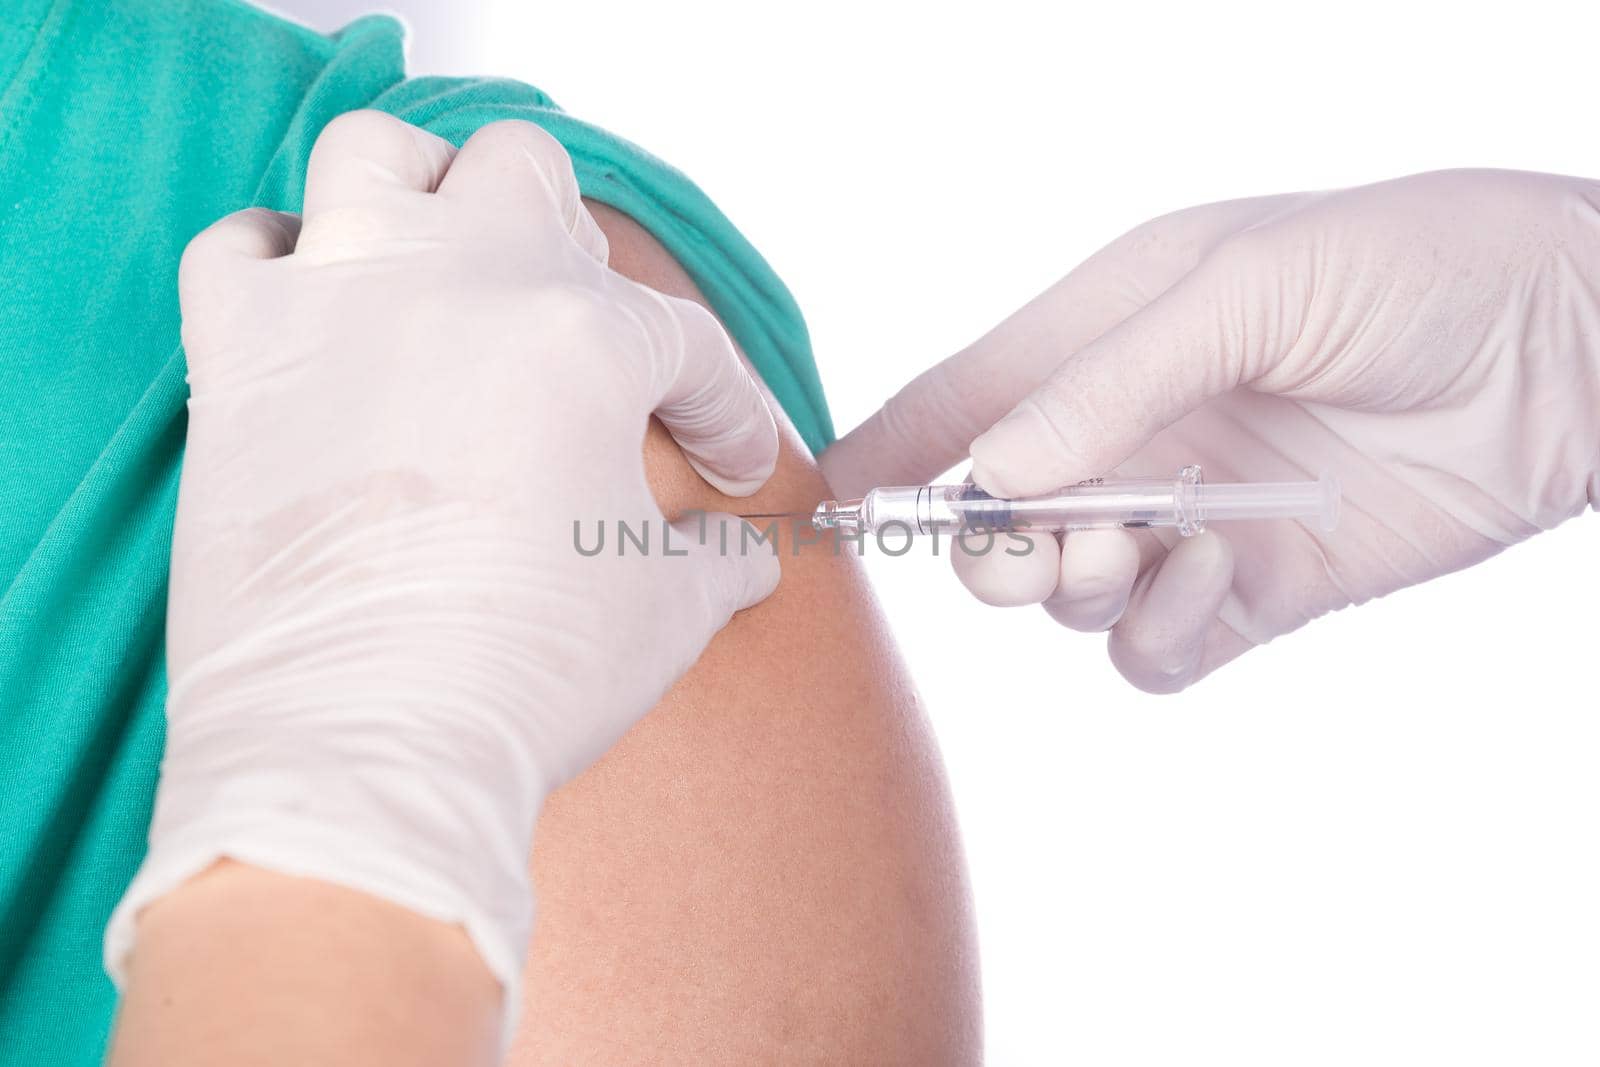 nurse with syringe giving a vaccine for a patient on white background